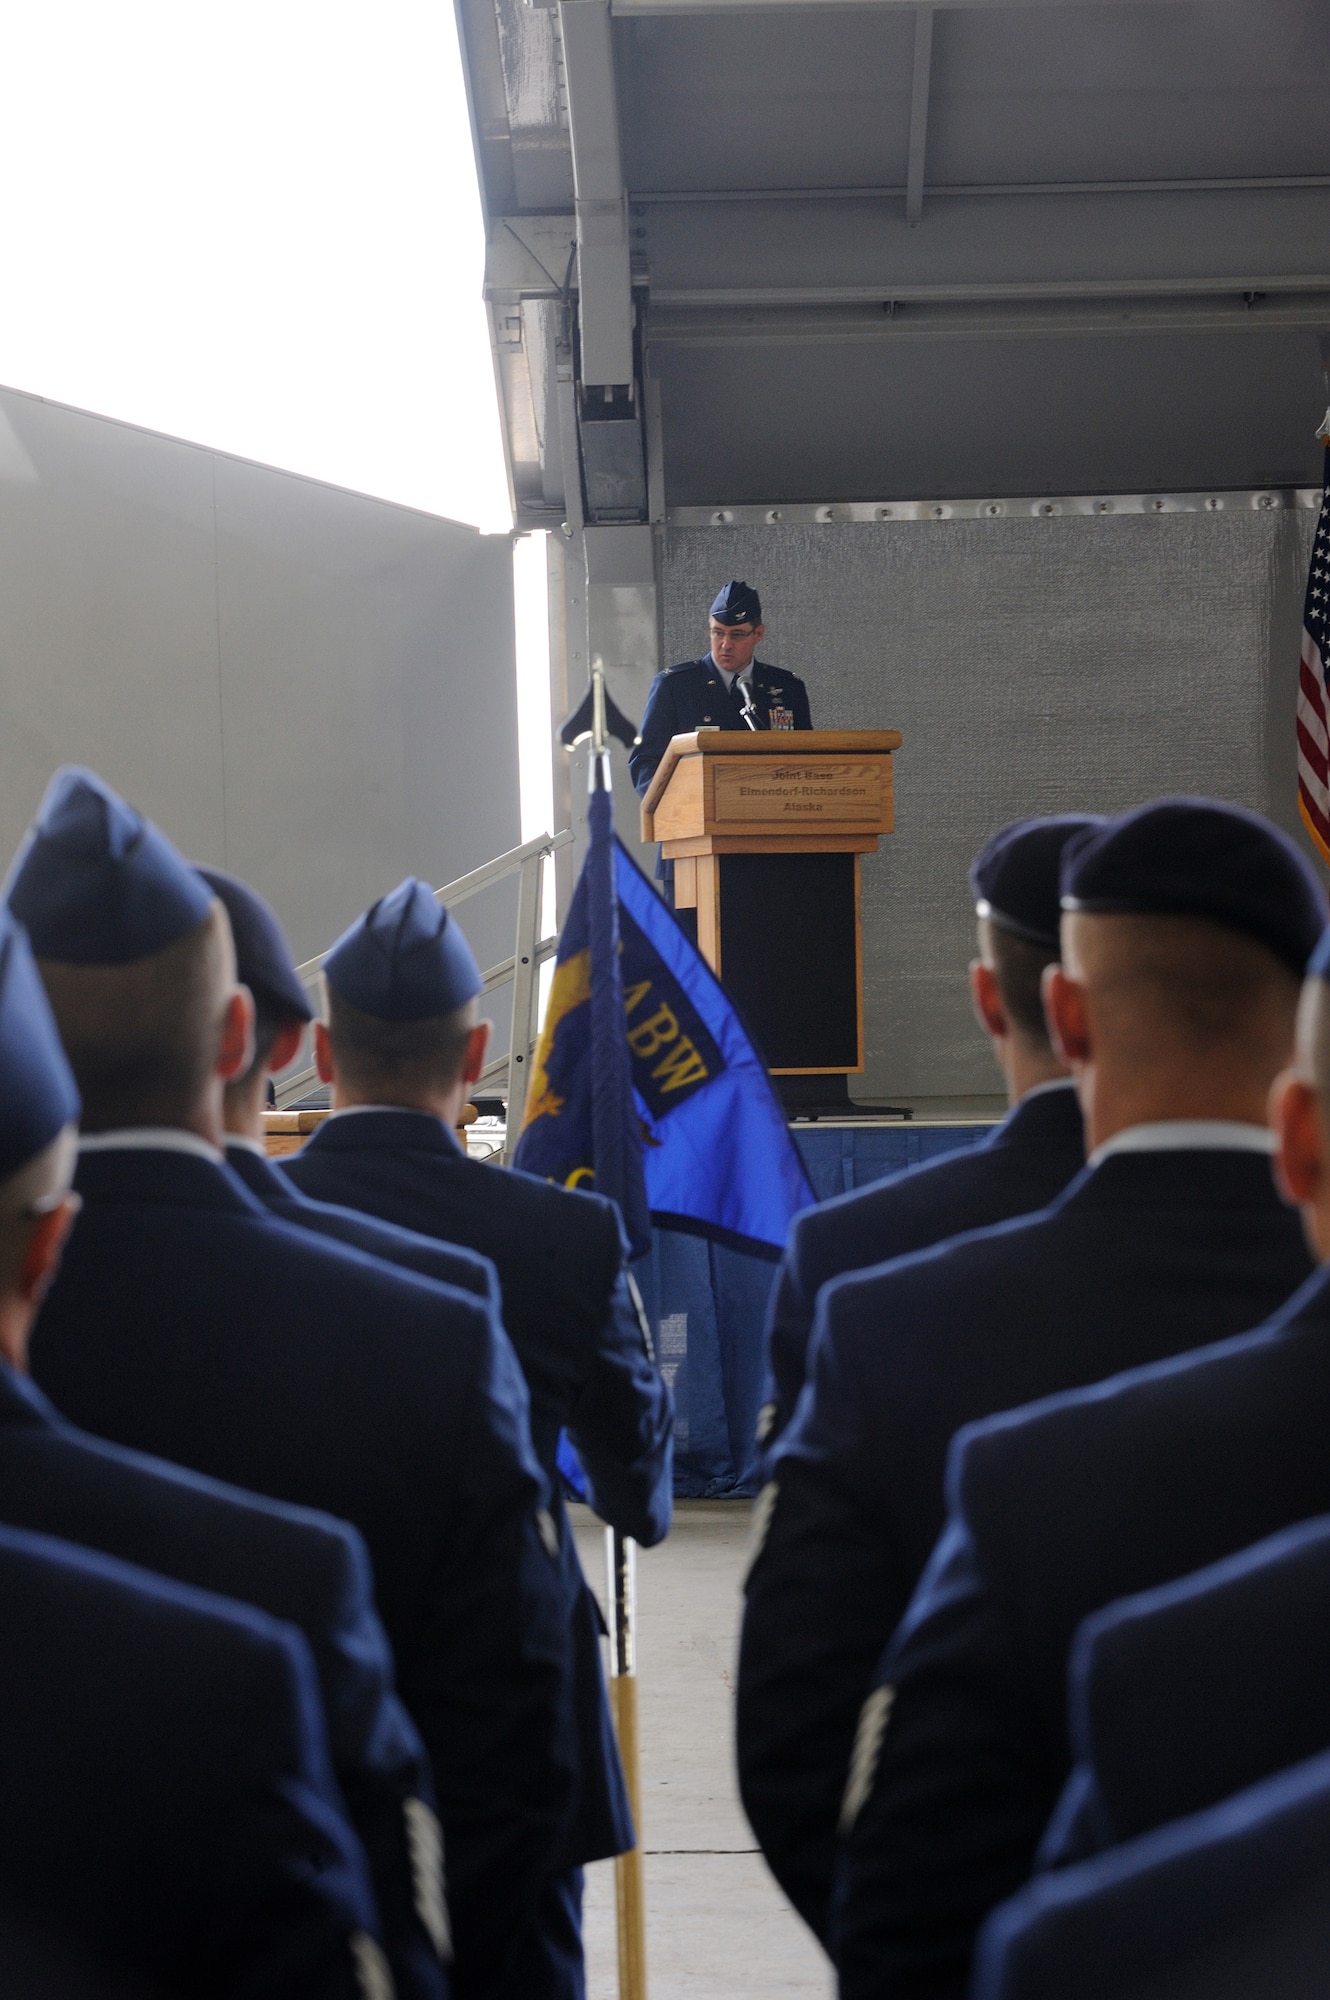 JOINT BASE ELMENDORF-RICHARDSON, Alaska -- Col. Robert D. Evans, commander 673d Air Base Wing (673 ABW), addresses attendees during the unit's activation ceremony July 30. The 673d ABW is the supporting unit for Joint Base Elmendorf-Richardson which is comprised of over 6,000 military, civilian and contractors from both Elmendorf Air Force Base and Fort Richardson Army Garrison near Anchorage, Alaska.  (Air Force photo by Master Sgt. Jeremiah Erickson)